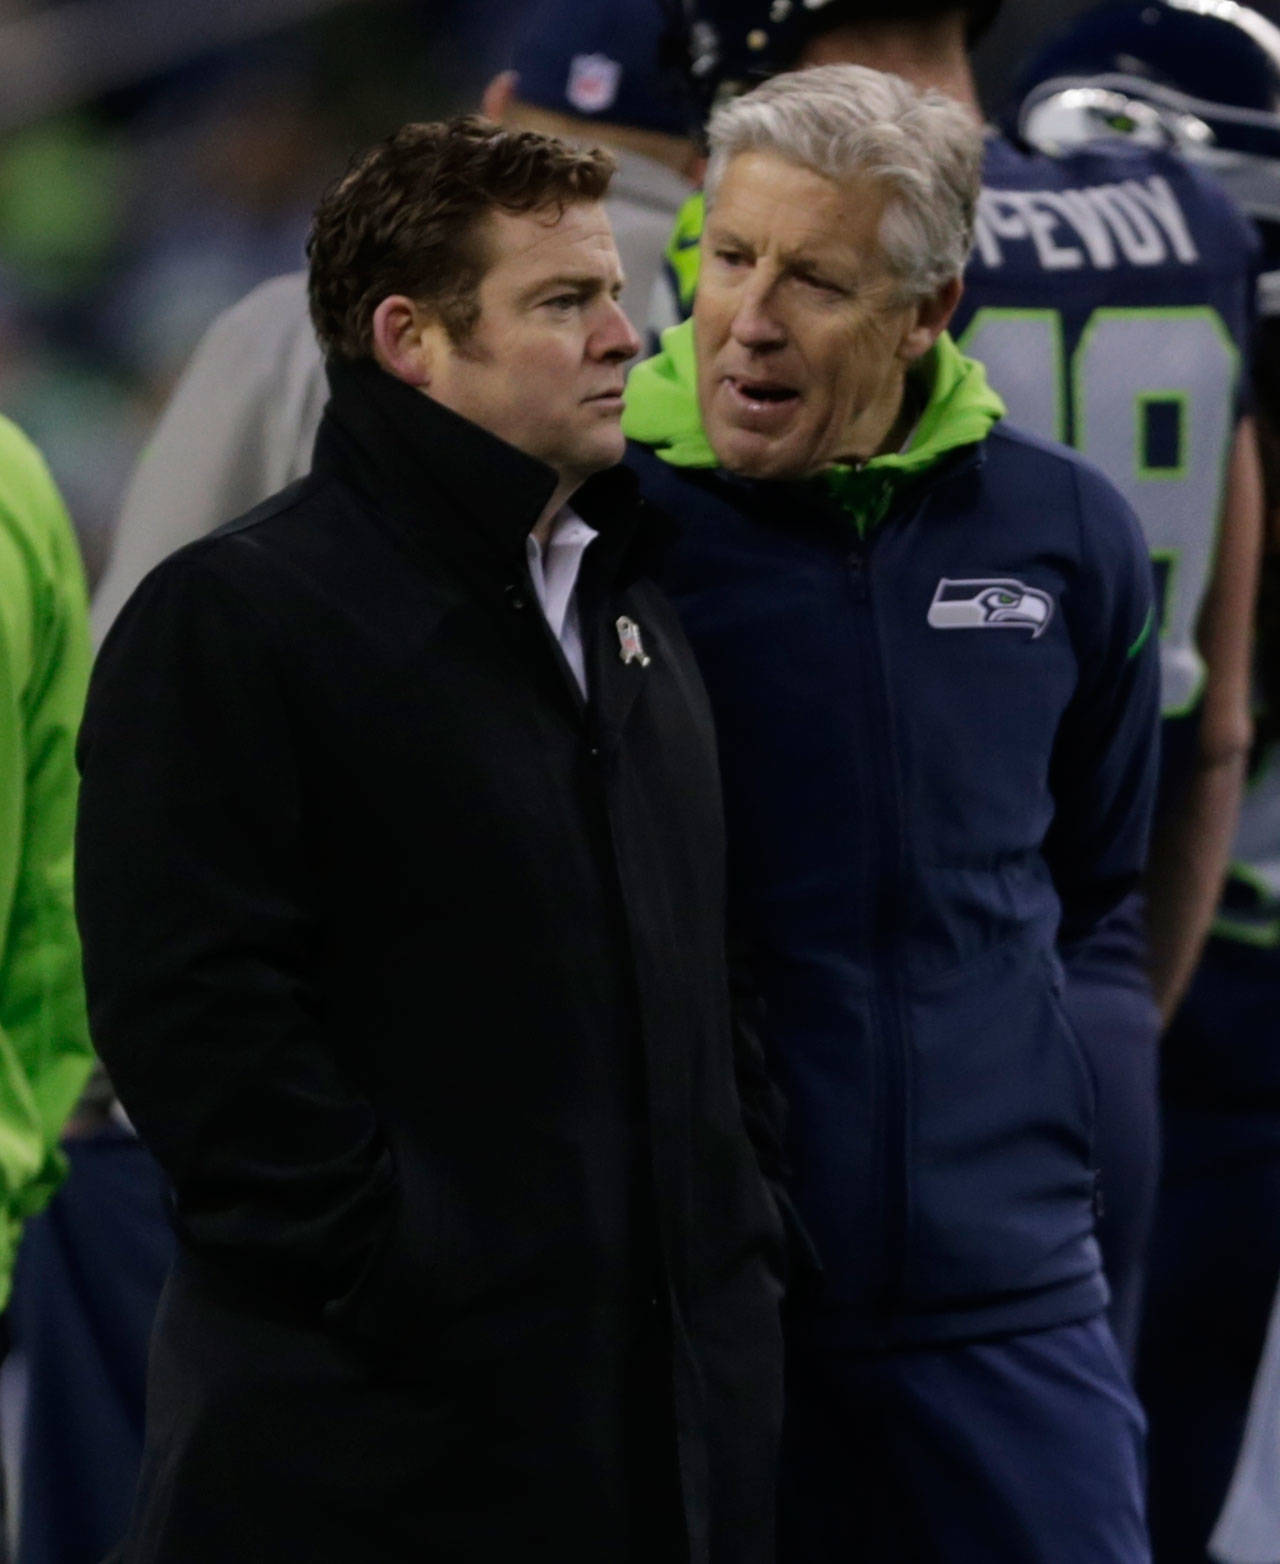 Seahawks general manager John Schneider (left) talks with head coach Pete Carroll before a playoff game against the Lions on Jan. 7, 2017, in Seattle. (AP Photo/Stephen Brashear)